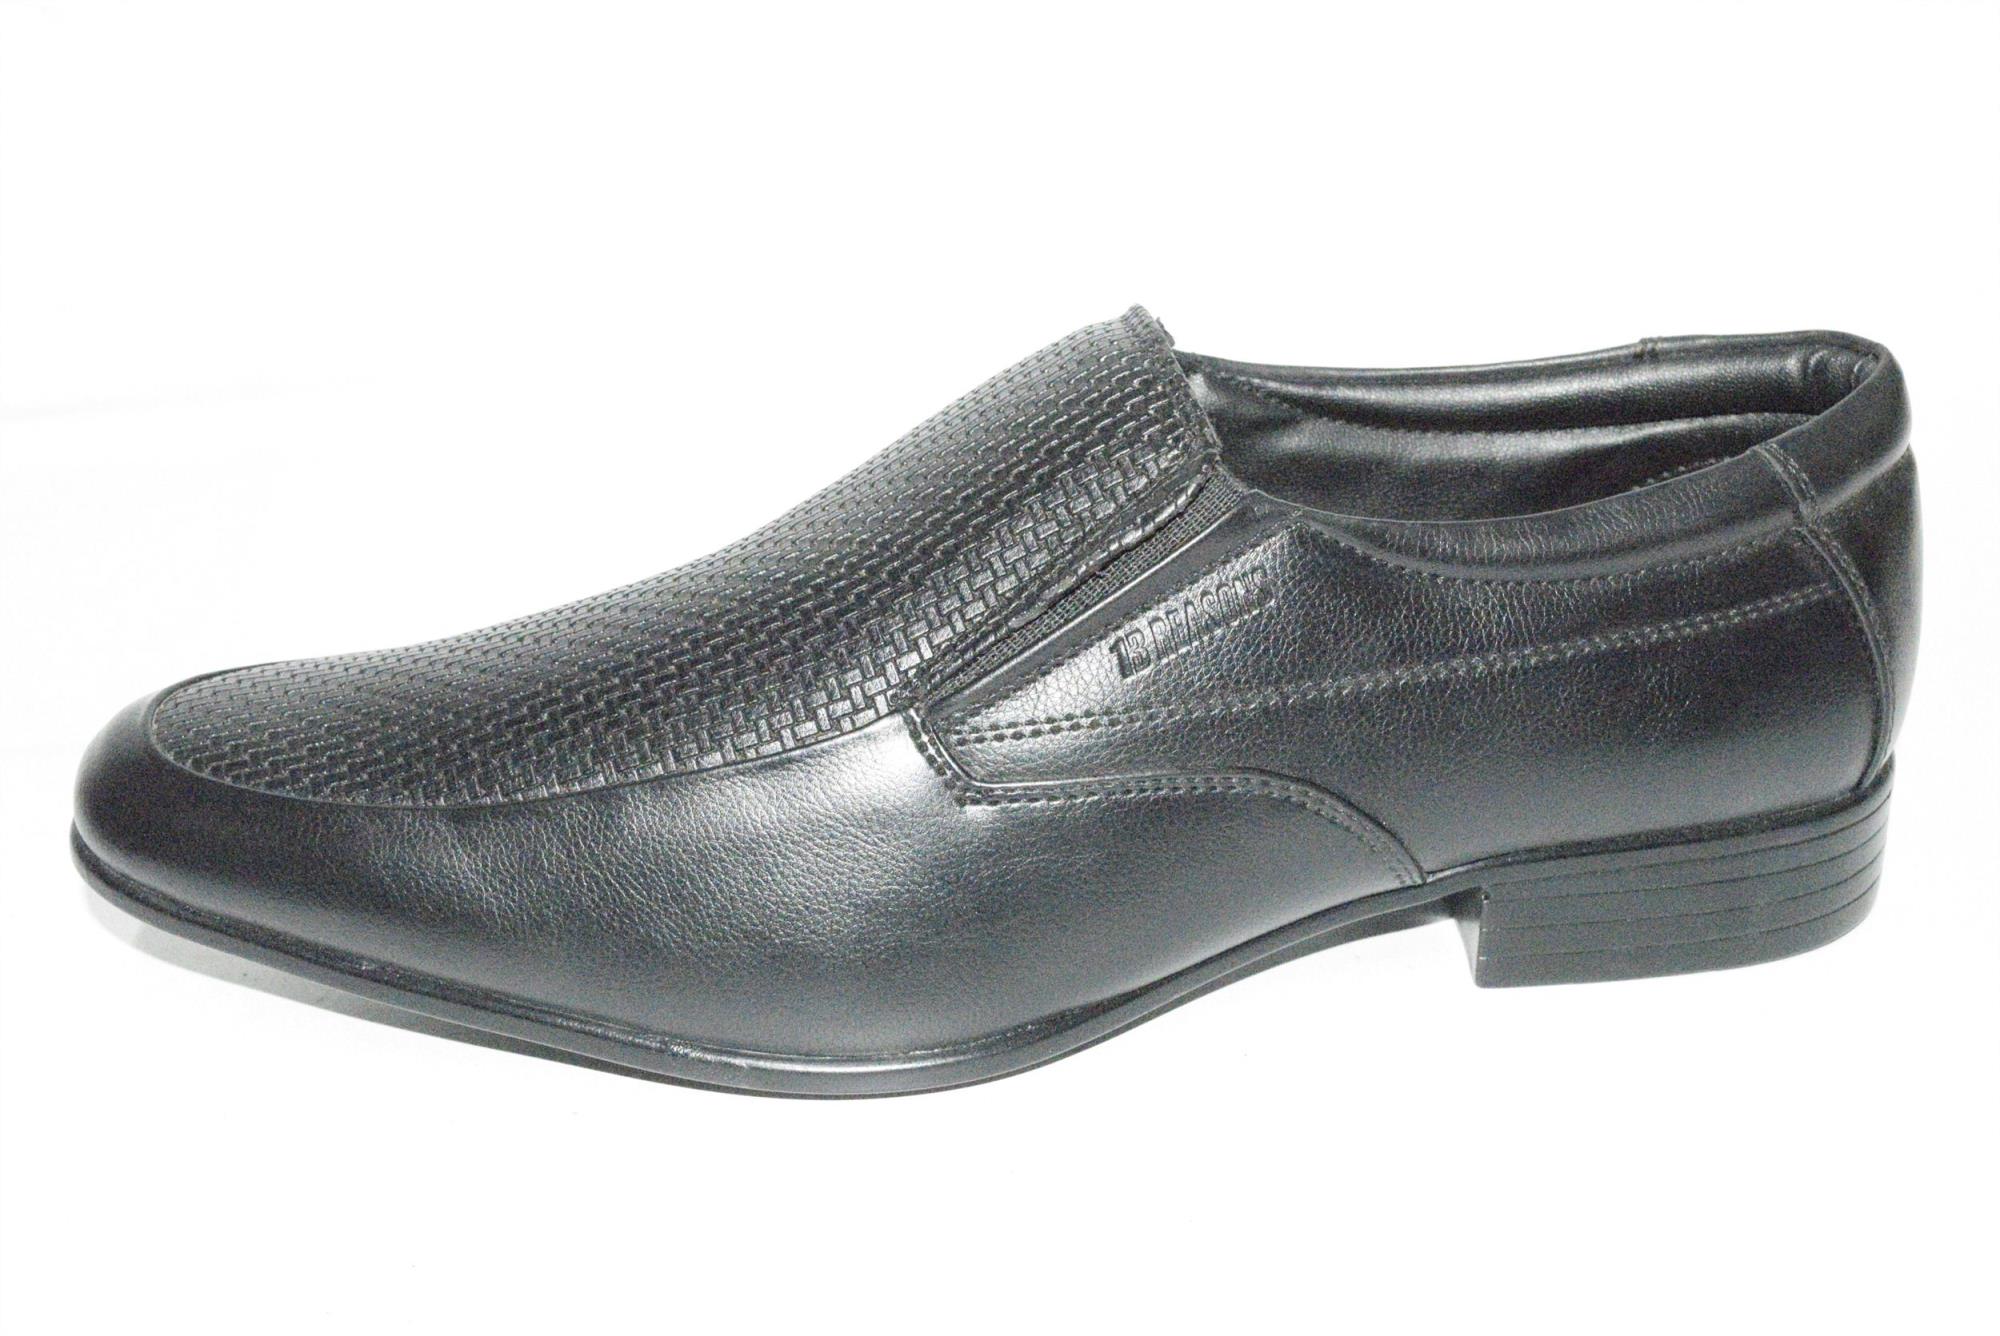 13 REASONS BLK FORMAL SHOES :: Online 